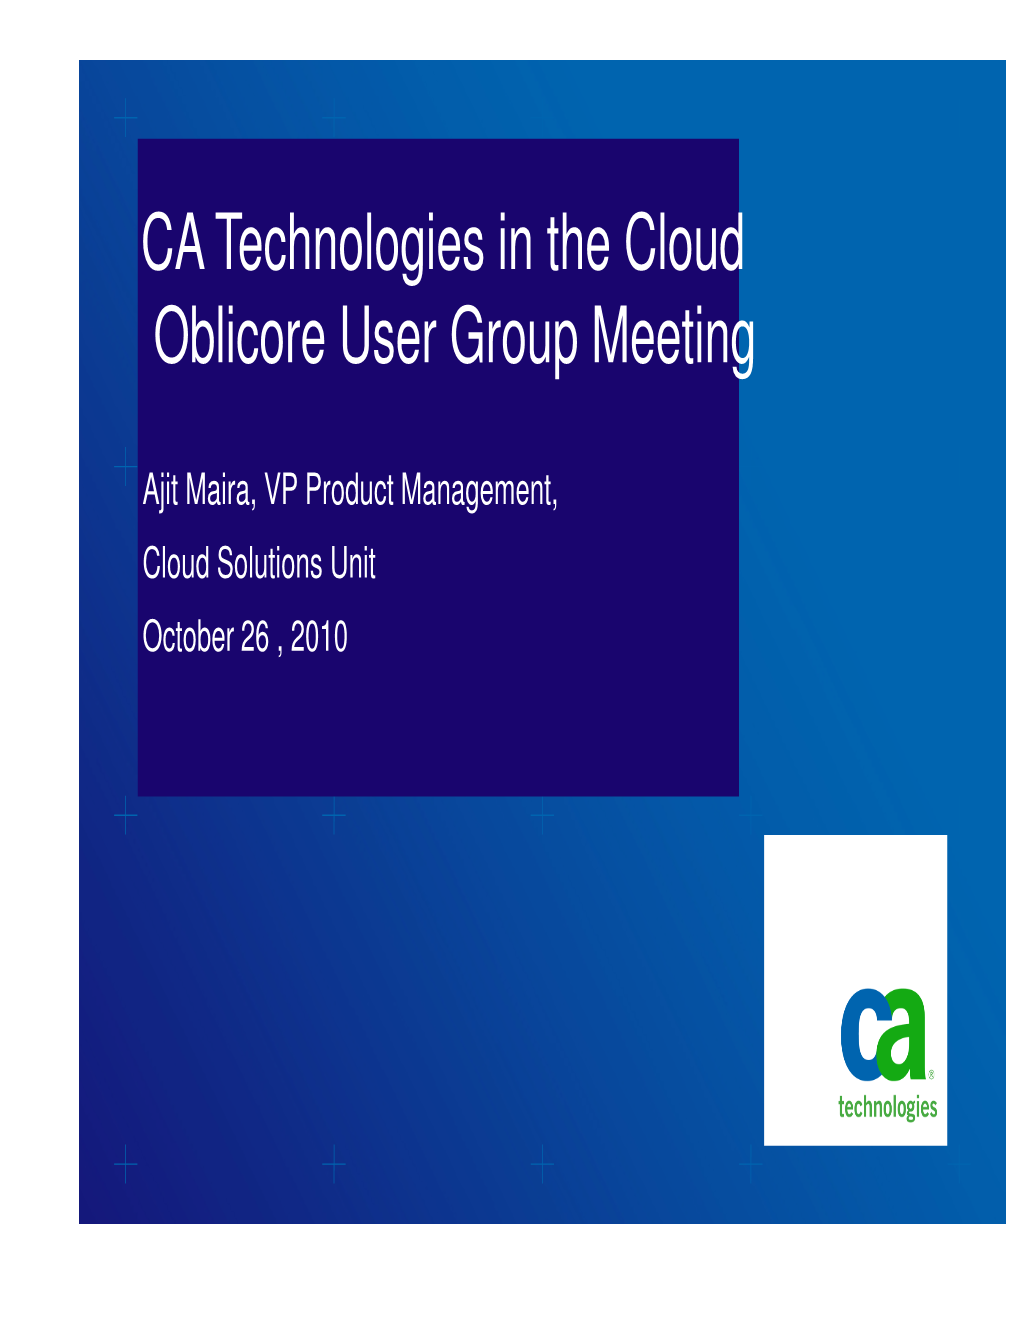 CA Technologies in the Cloud Oblicore User Group Meeting